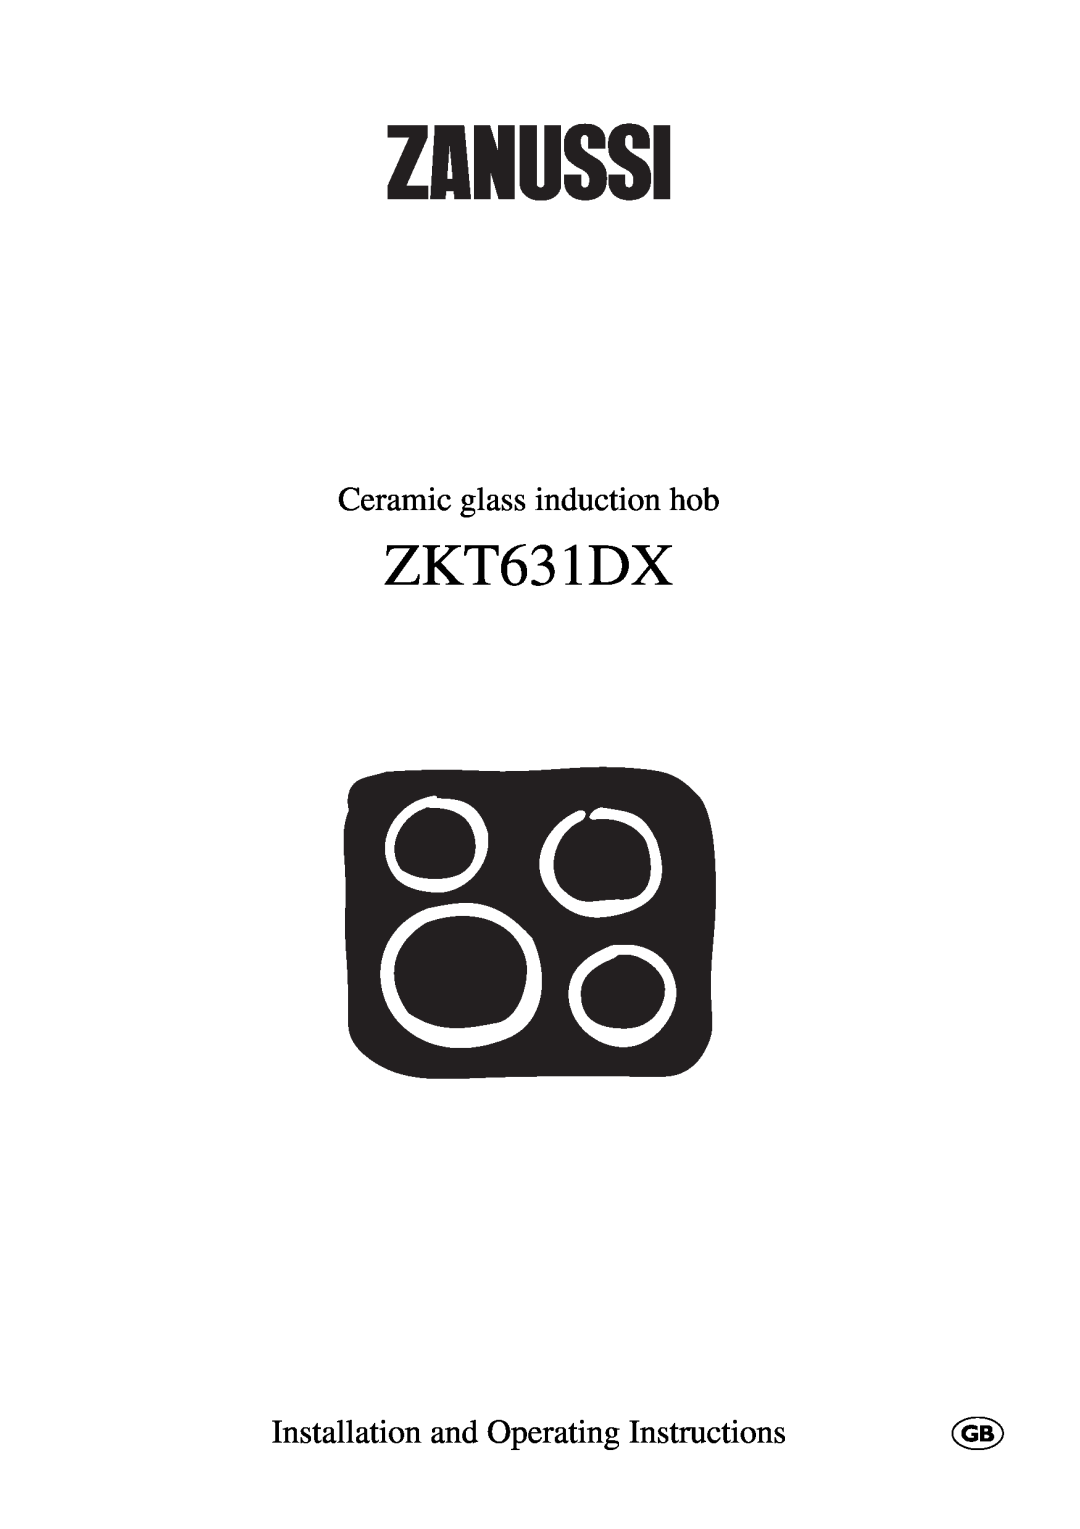 Zanussi ZKT631DX manual Ceramic glass induction hob, Installation and Operating Instructions 